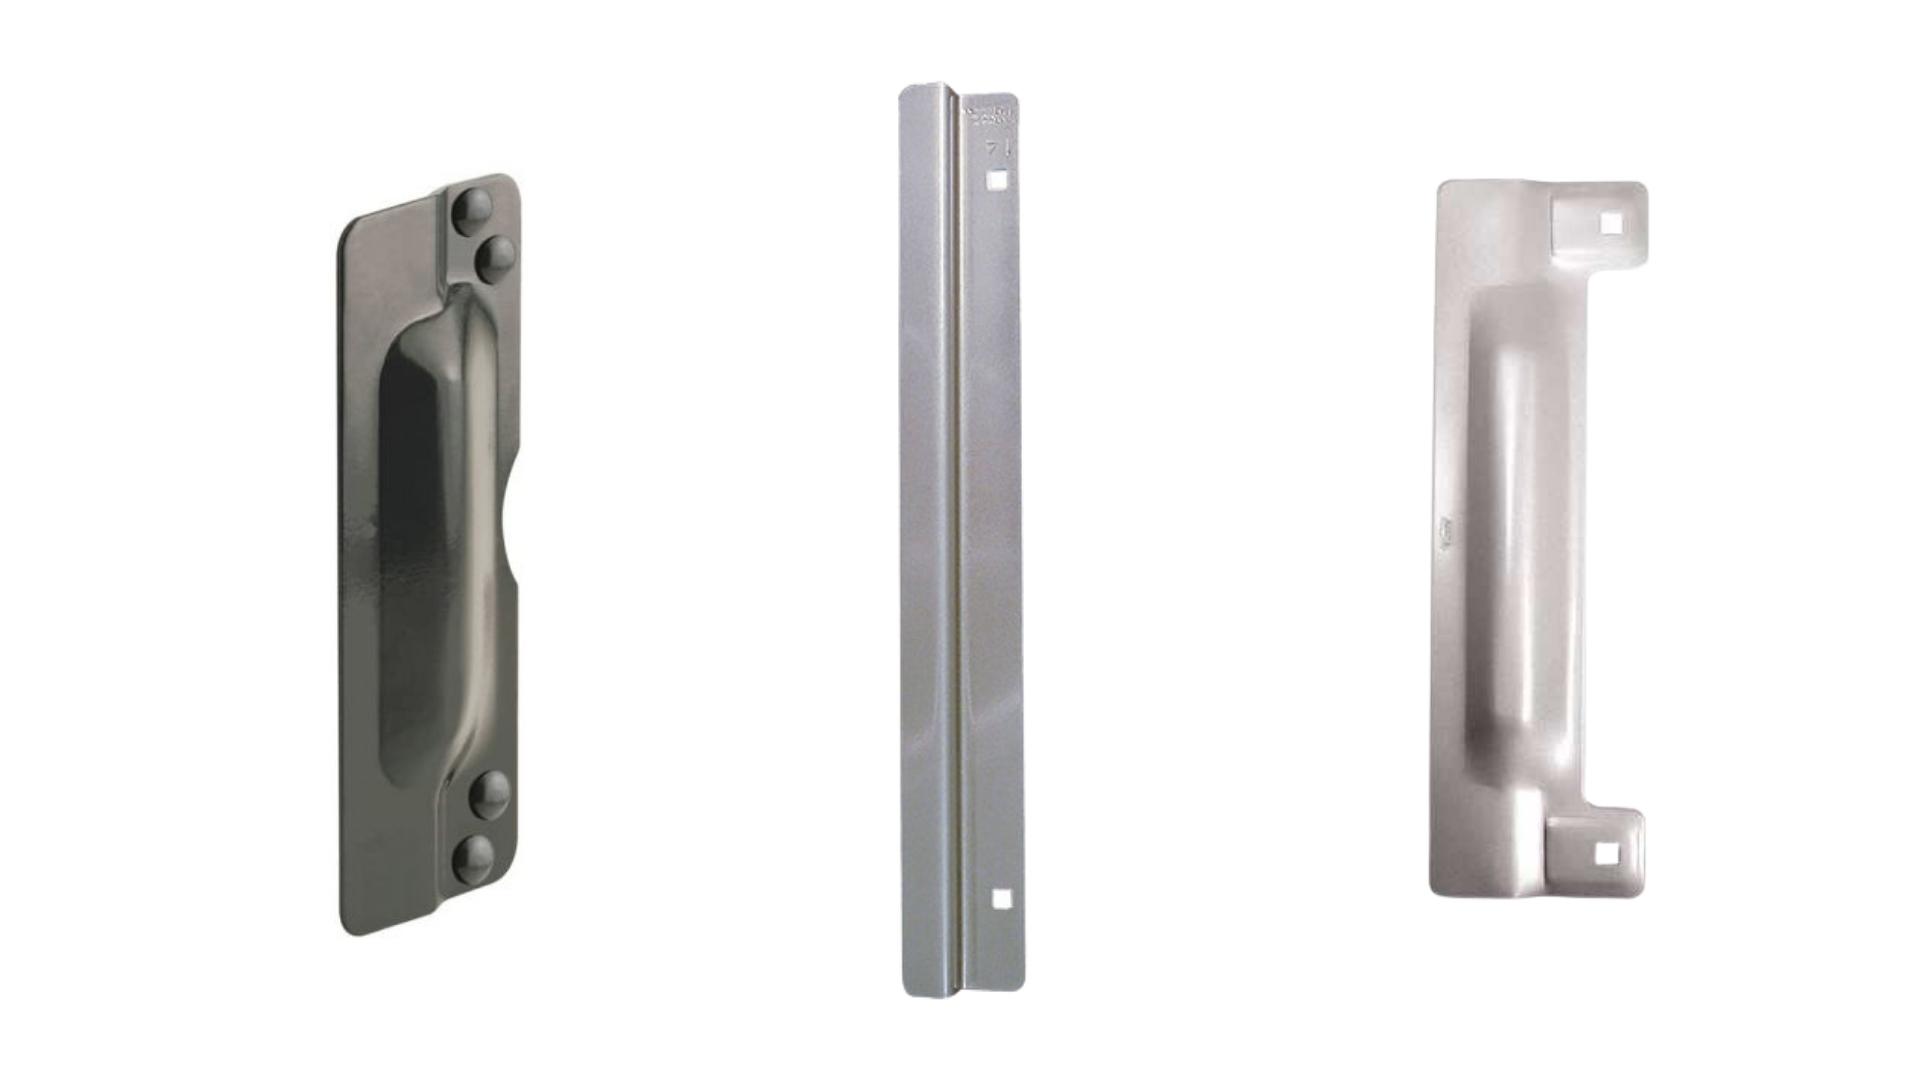 Latch guards in different styles, sizes, and finishes.